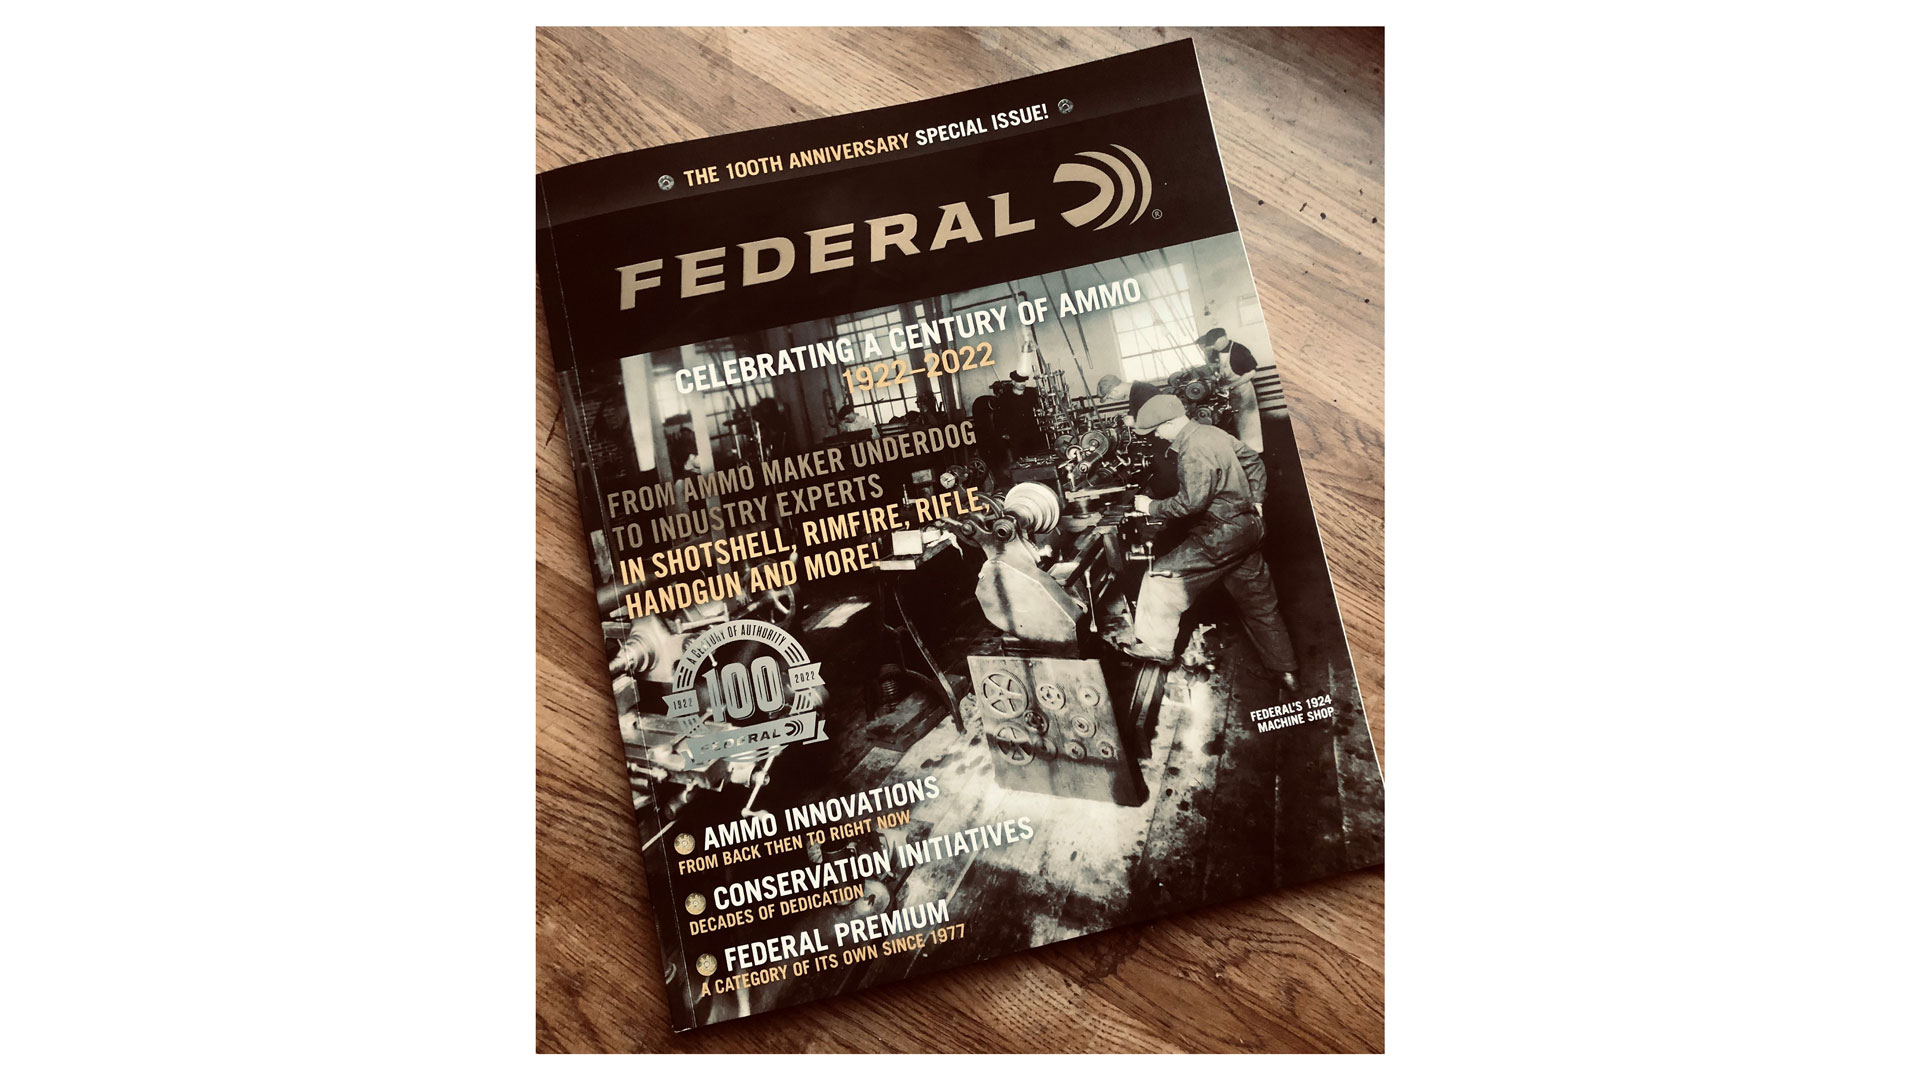 magazine cover special edition Federal Premium 100th anniversary tribute book on table